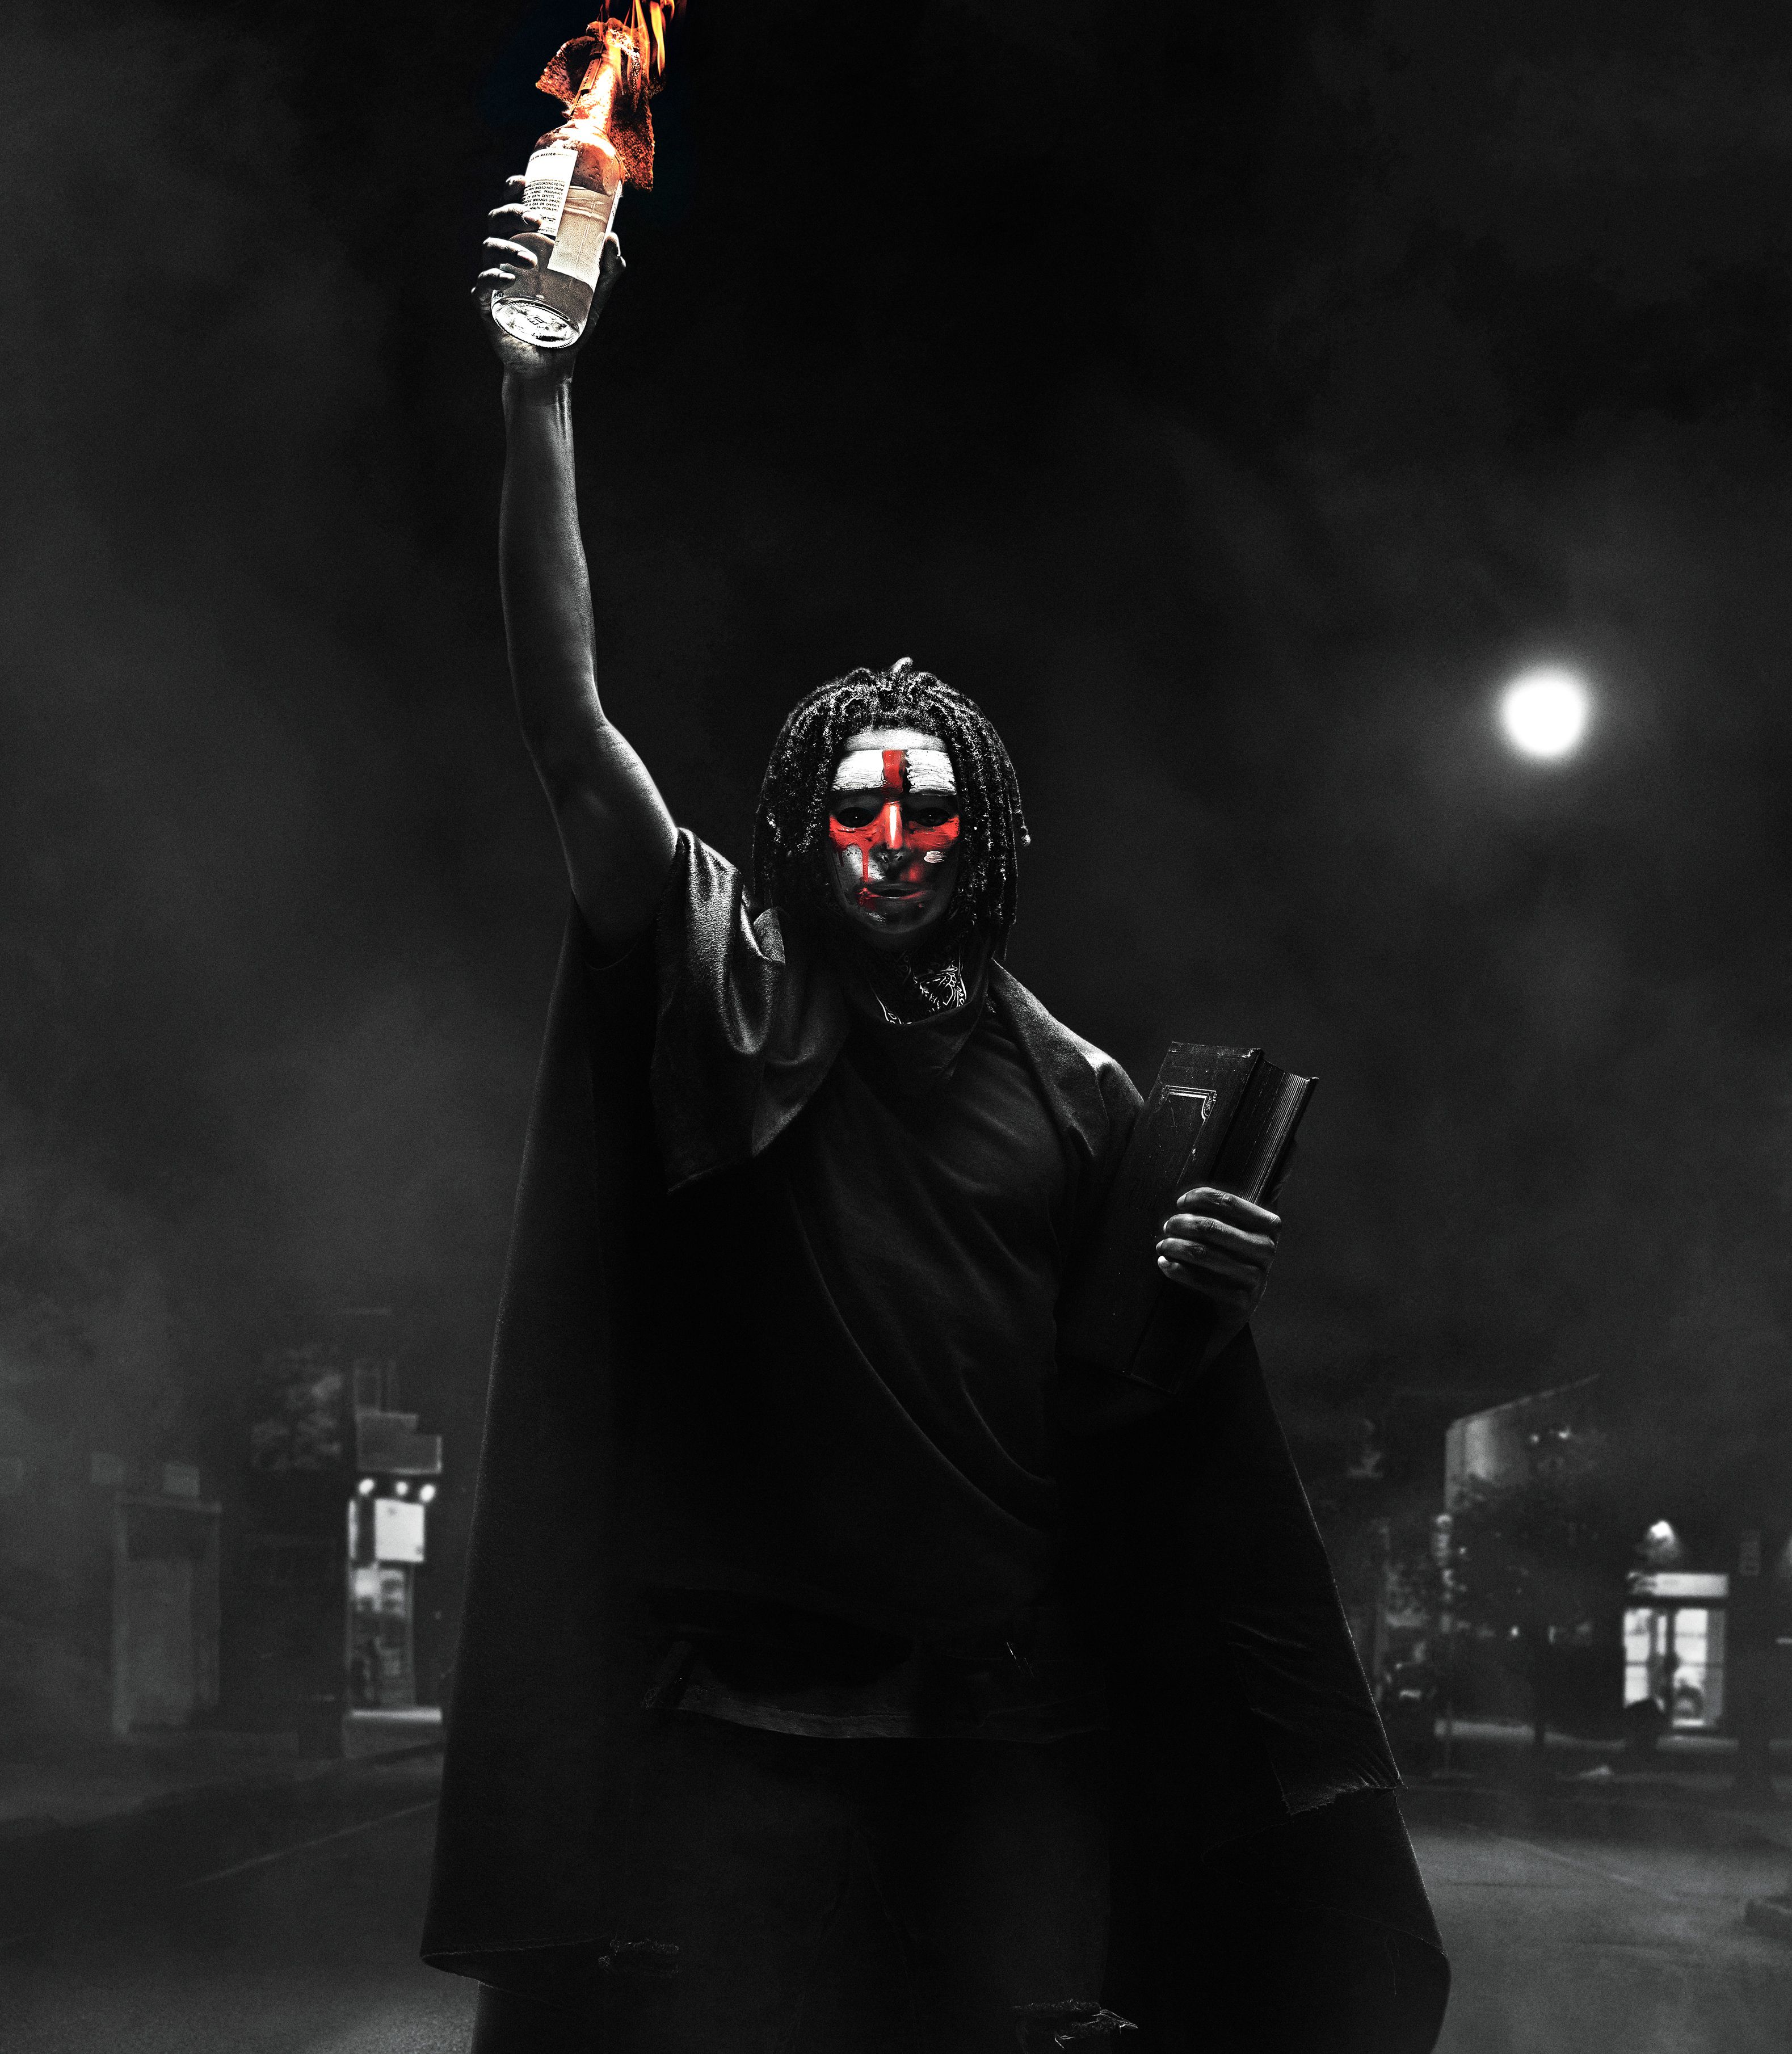 The First Purge Wallpapers Wallpaper Cave Follow the link below to download 100% pure hd quality mobile wallpaper the first purge 2018 on your mobile phones, android phones and iphones. the first purge wallpapers wallpaper cave